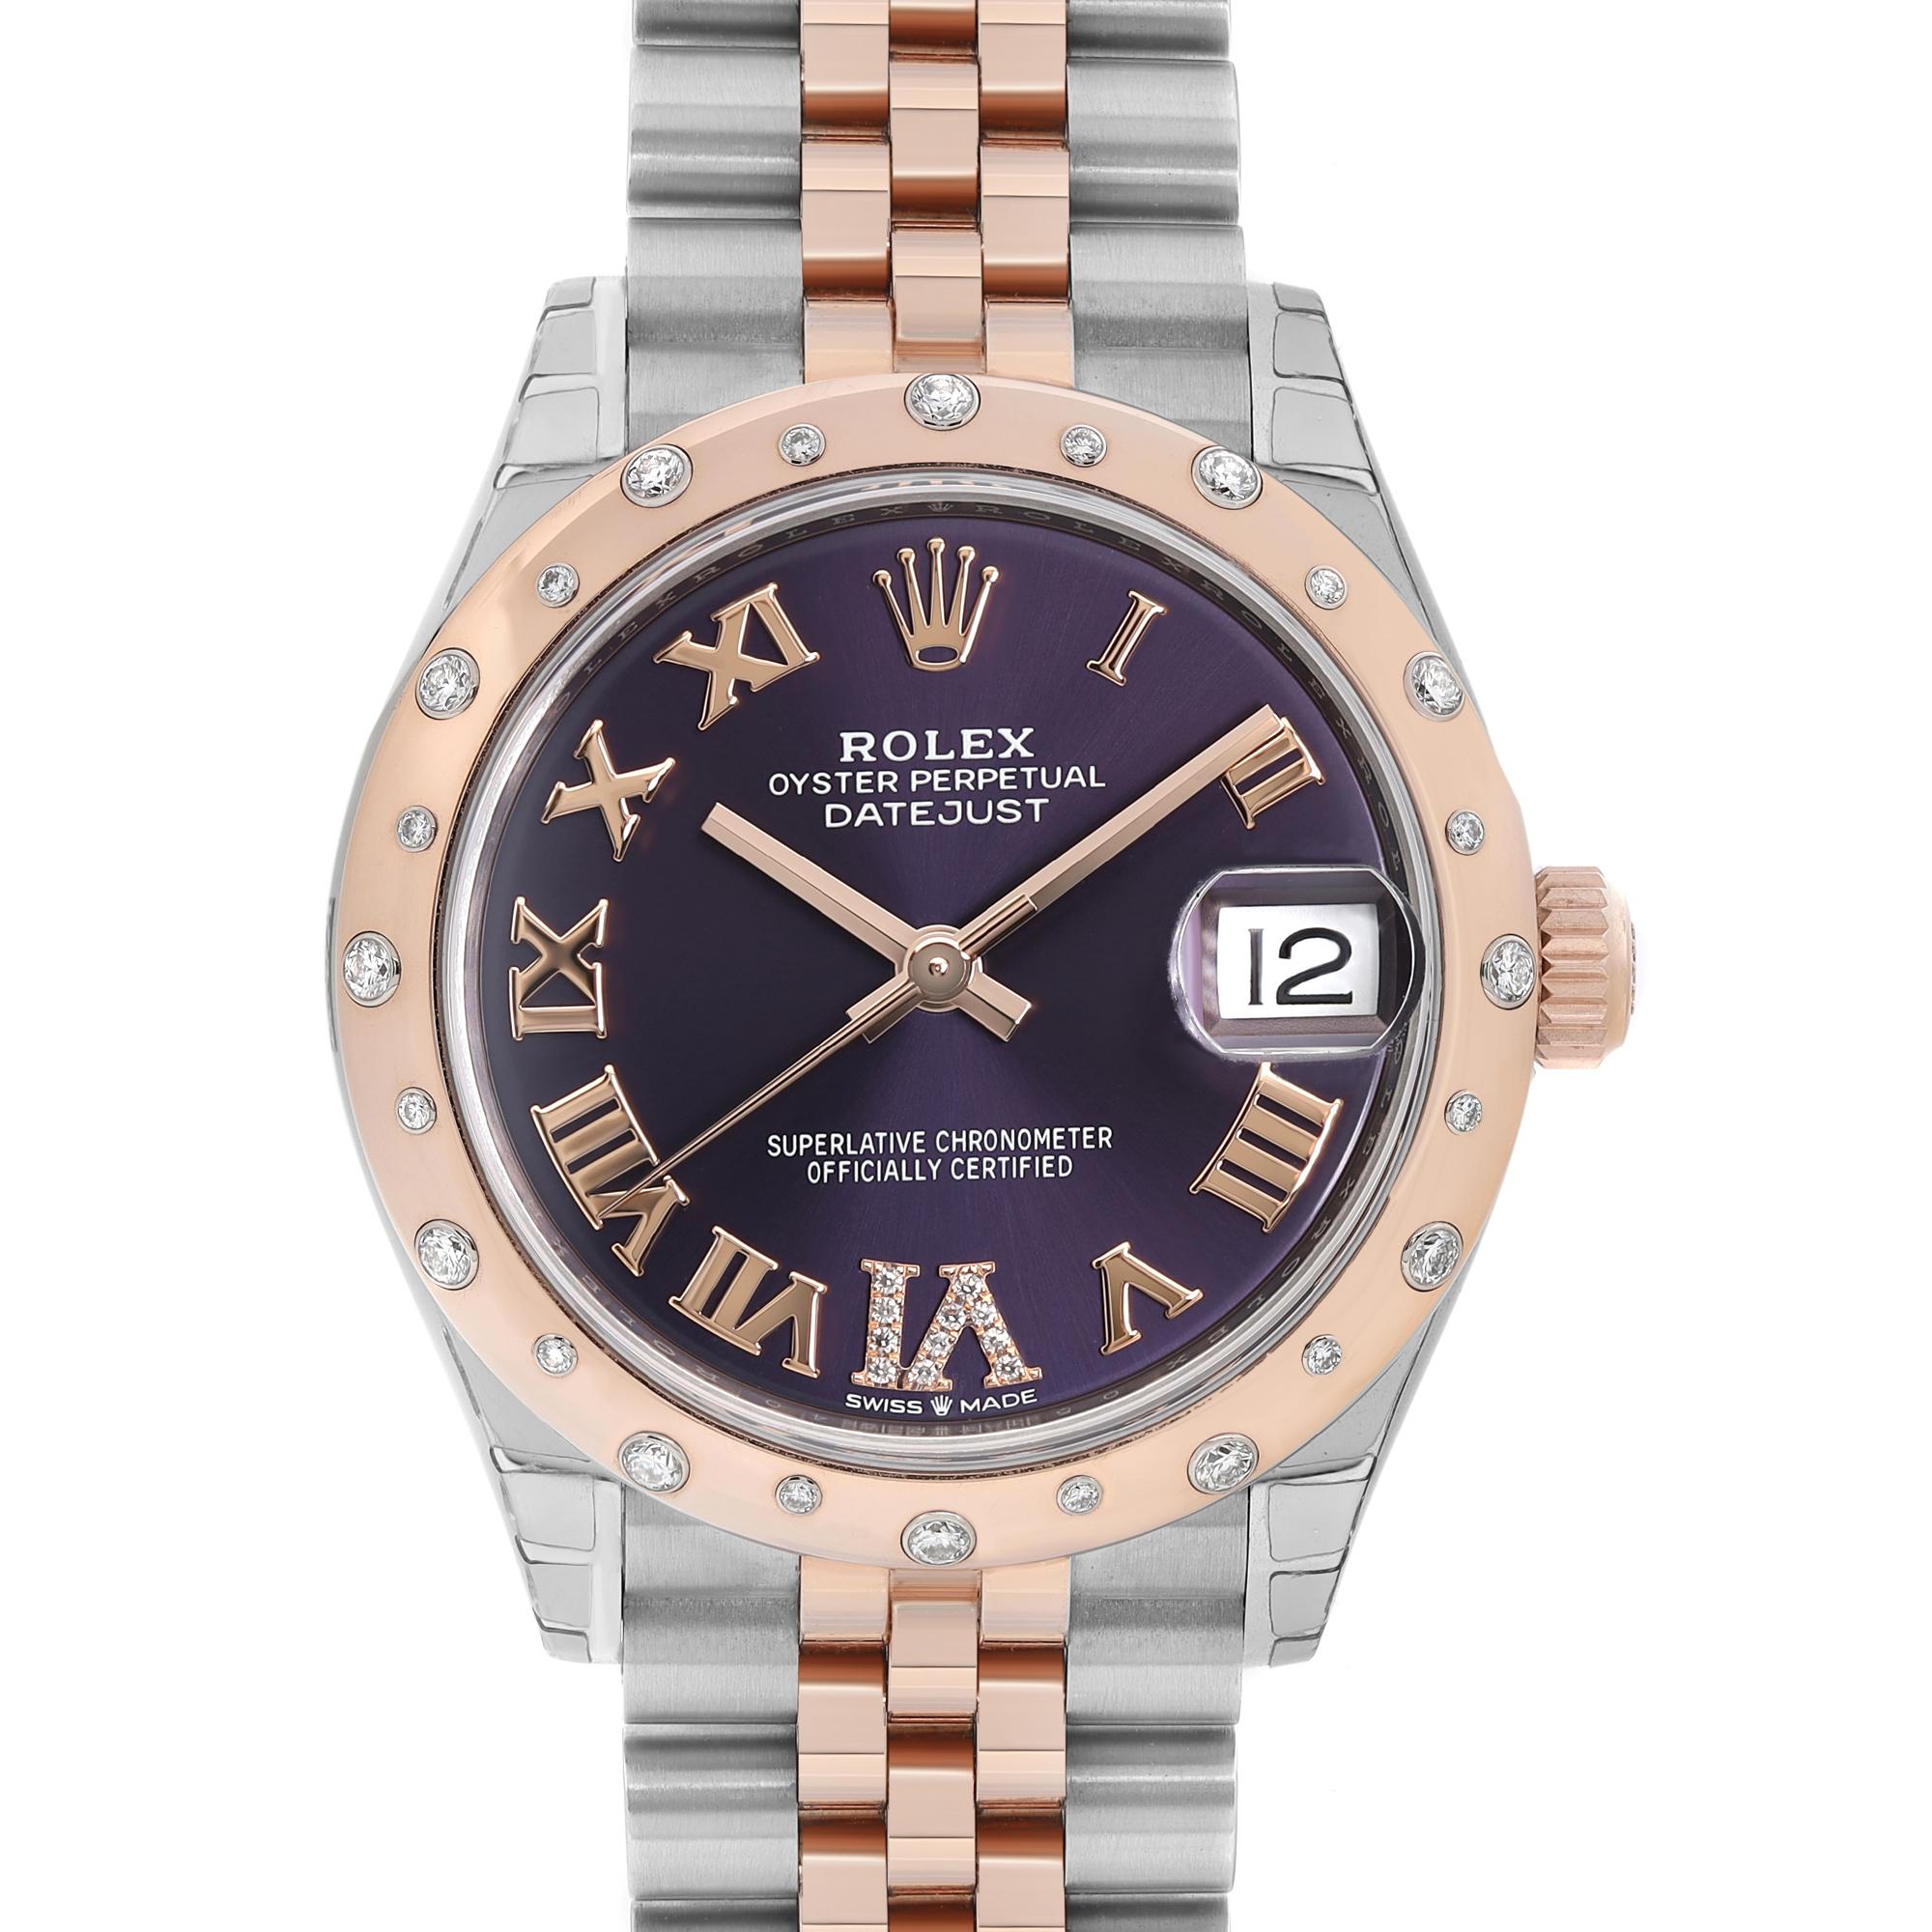 Watch has all stickers including the barcode except back case stickers.  It comes with an Original Box but No papers are included. Comes with an authenticity card. Covered by a 5-year warranty.

Brand: Rolex  Type: Wristwatch  Department: Women 